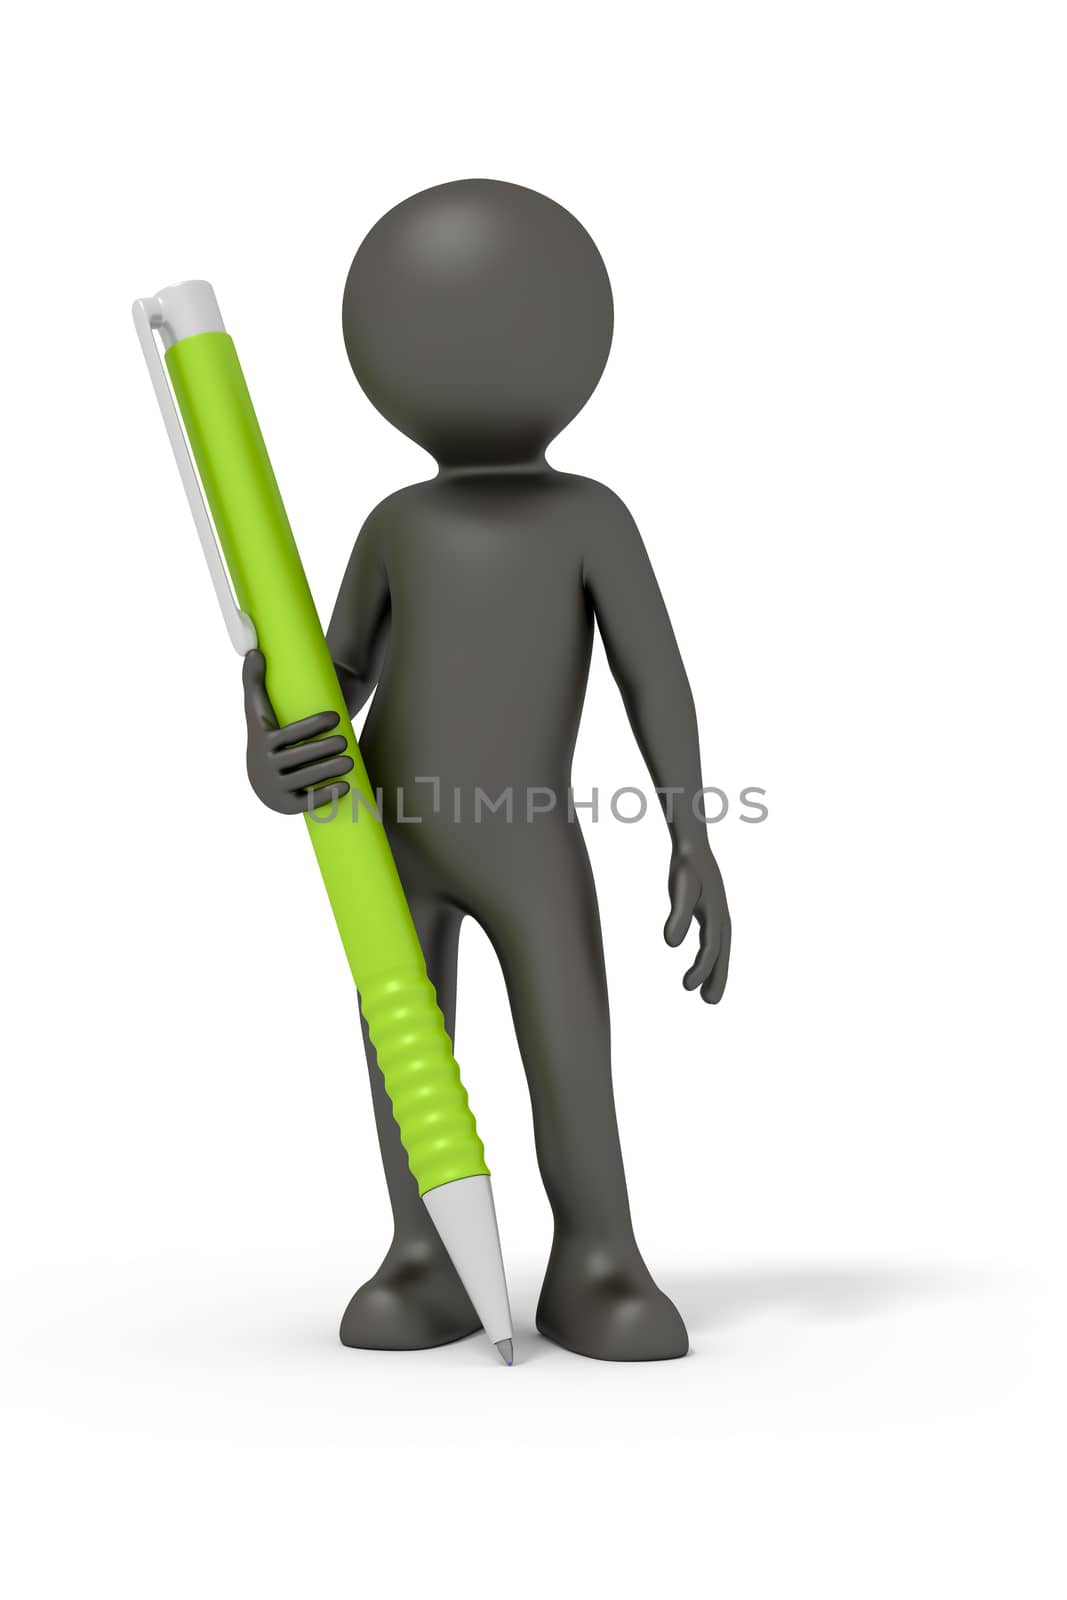 An image of a rendered black man with a ball pen